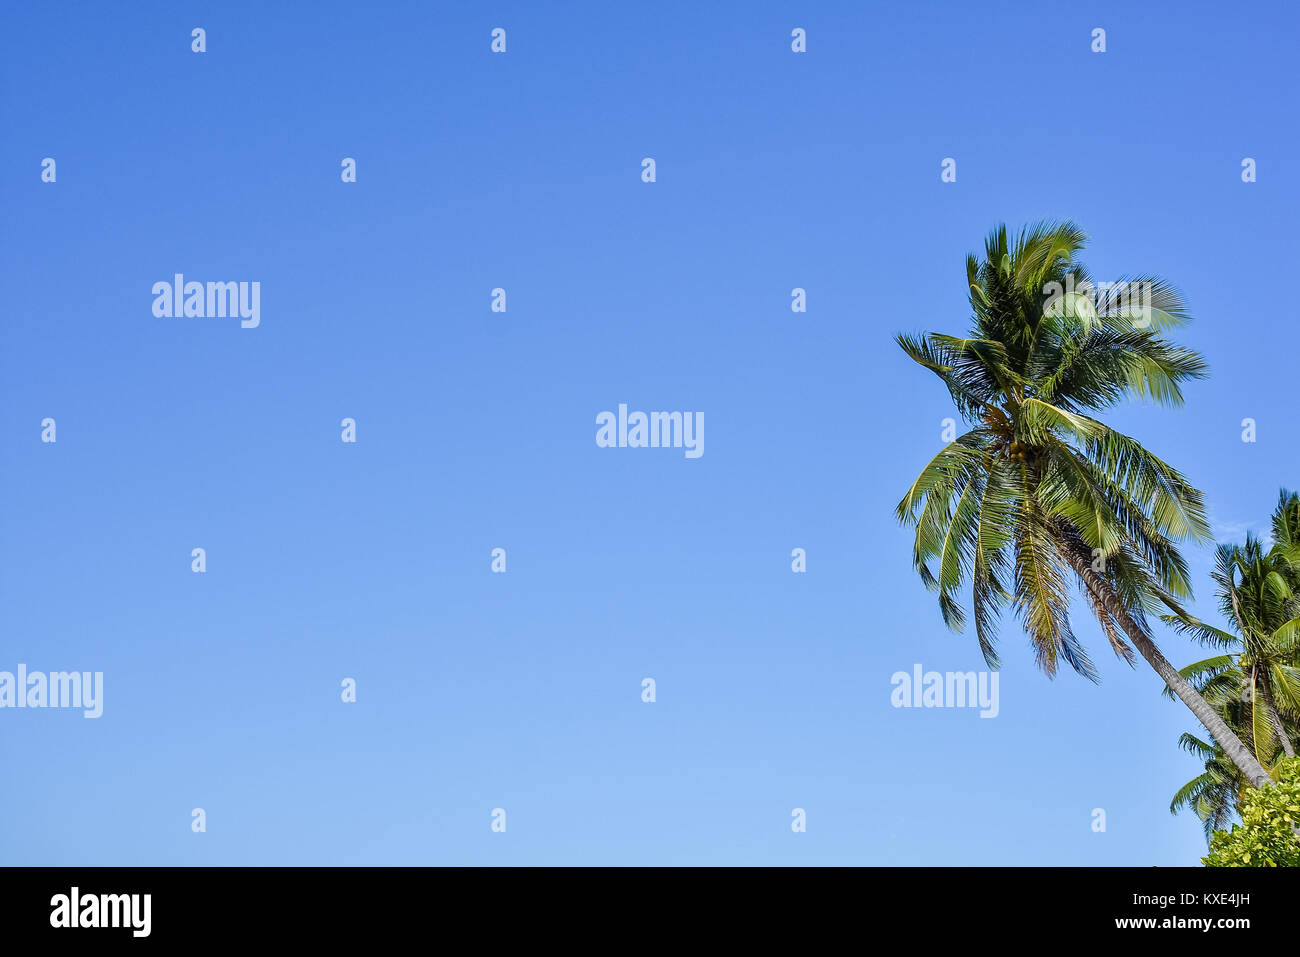 Upwards view of the tops of tall palm trees against a clear blue sky. Stock Photo